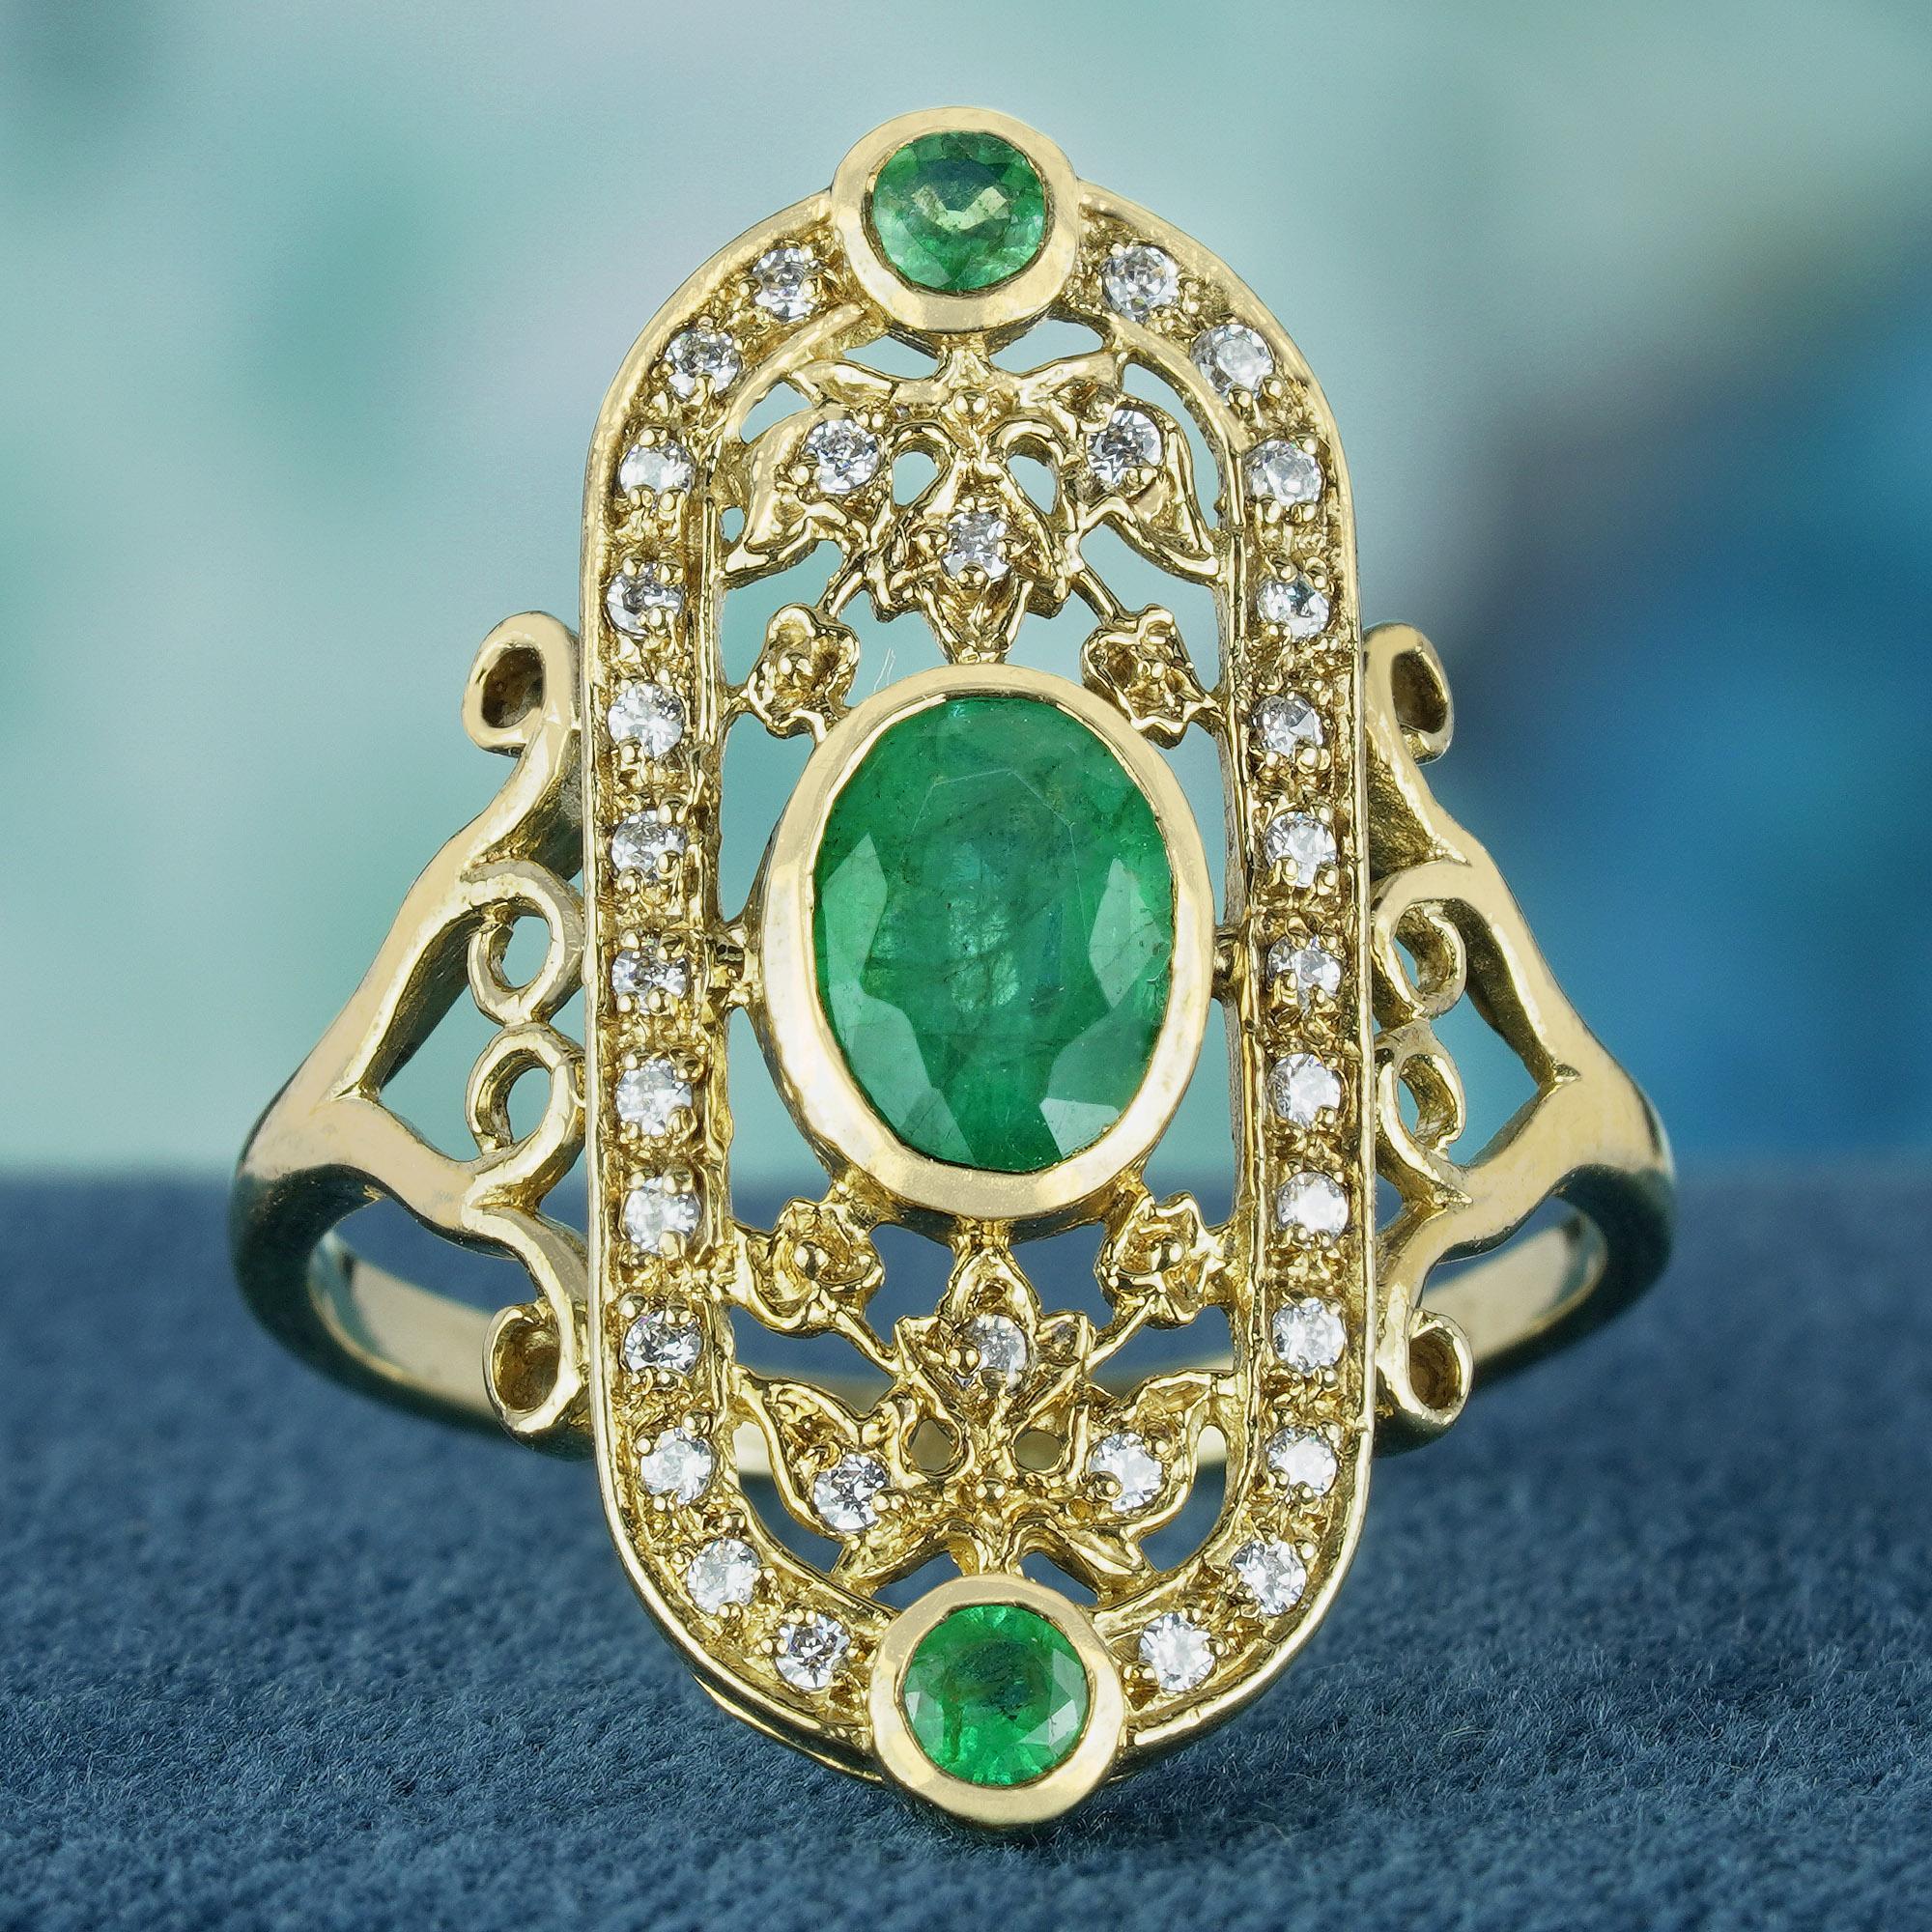 Crafted from luminous yellow gold, this ring boasts a slim band adorned with intricate scrollwork on the shoulders. The focal point of the design is a large oval emerald, accents by two smaller round emeralds positioned at the top and bottom of the